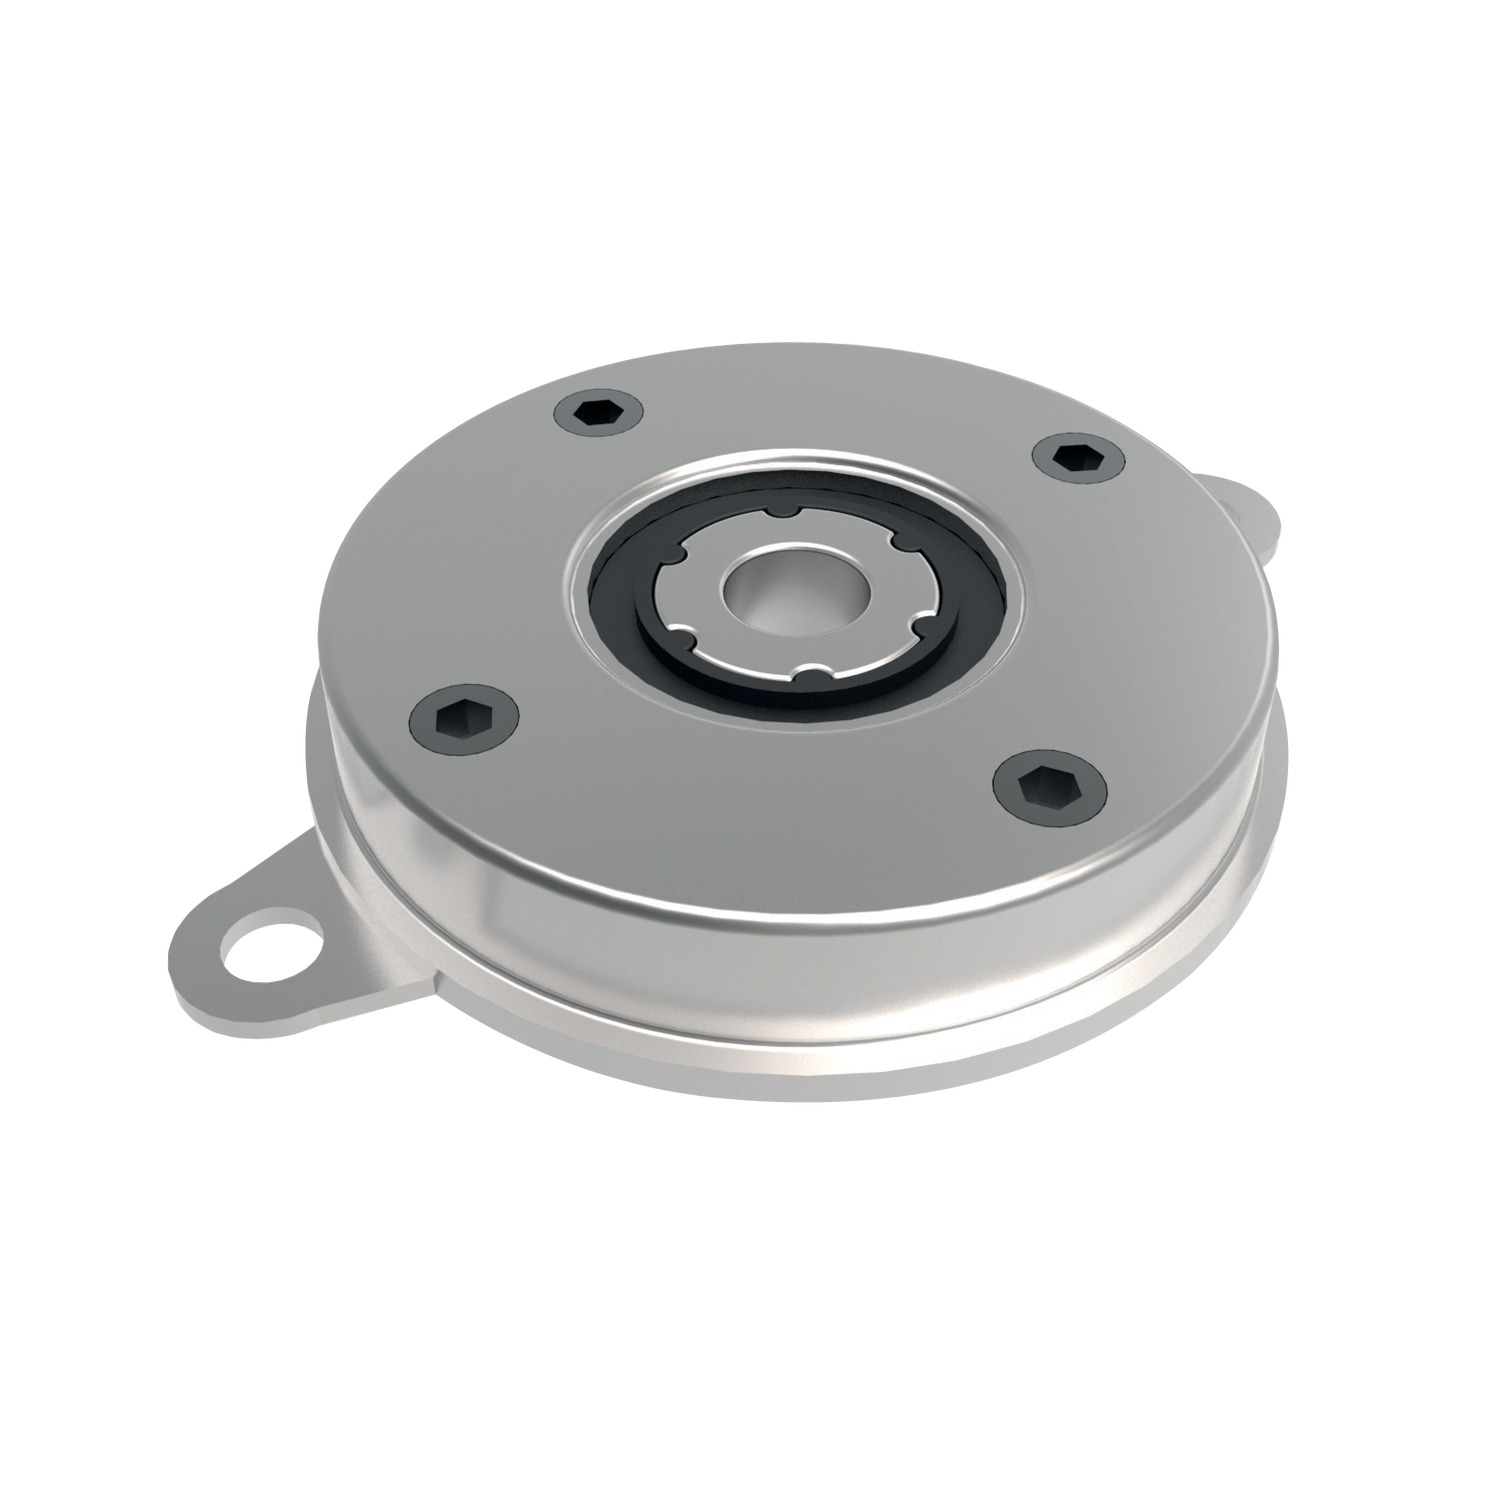 Product Q3260, Disk Dampers uni-directional - continuous direction - up to 85 Kgf.cm / 